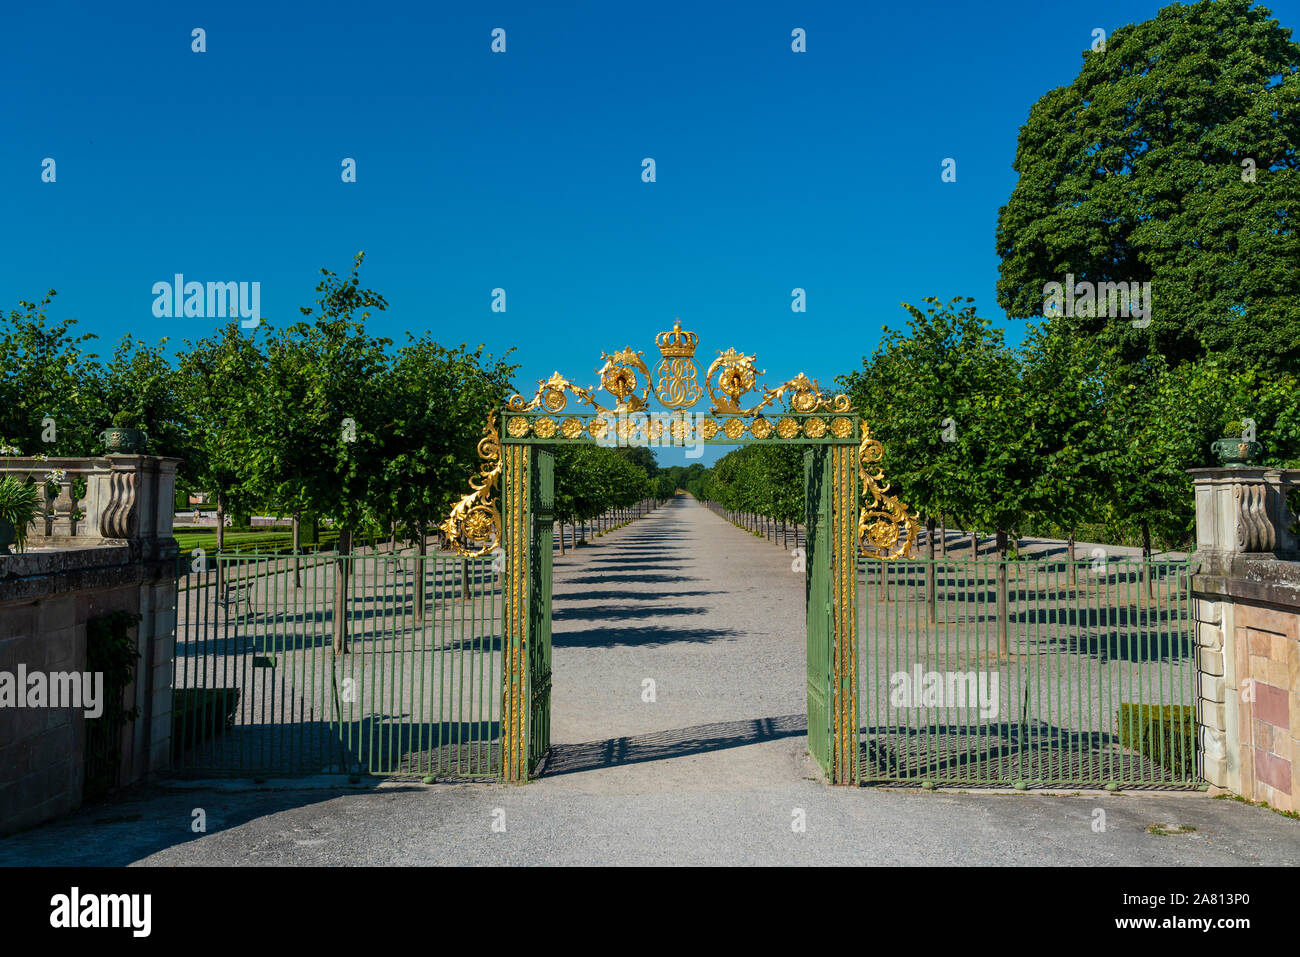 A Golden Gate To The Gardens At Drottningholm Palace Near